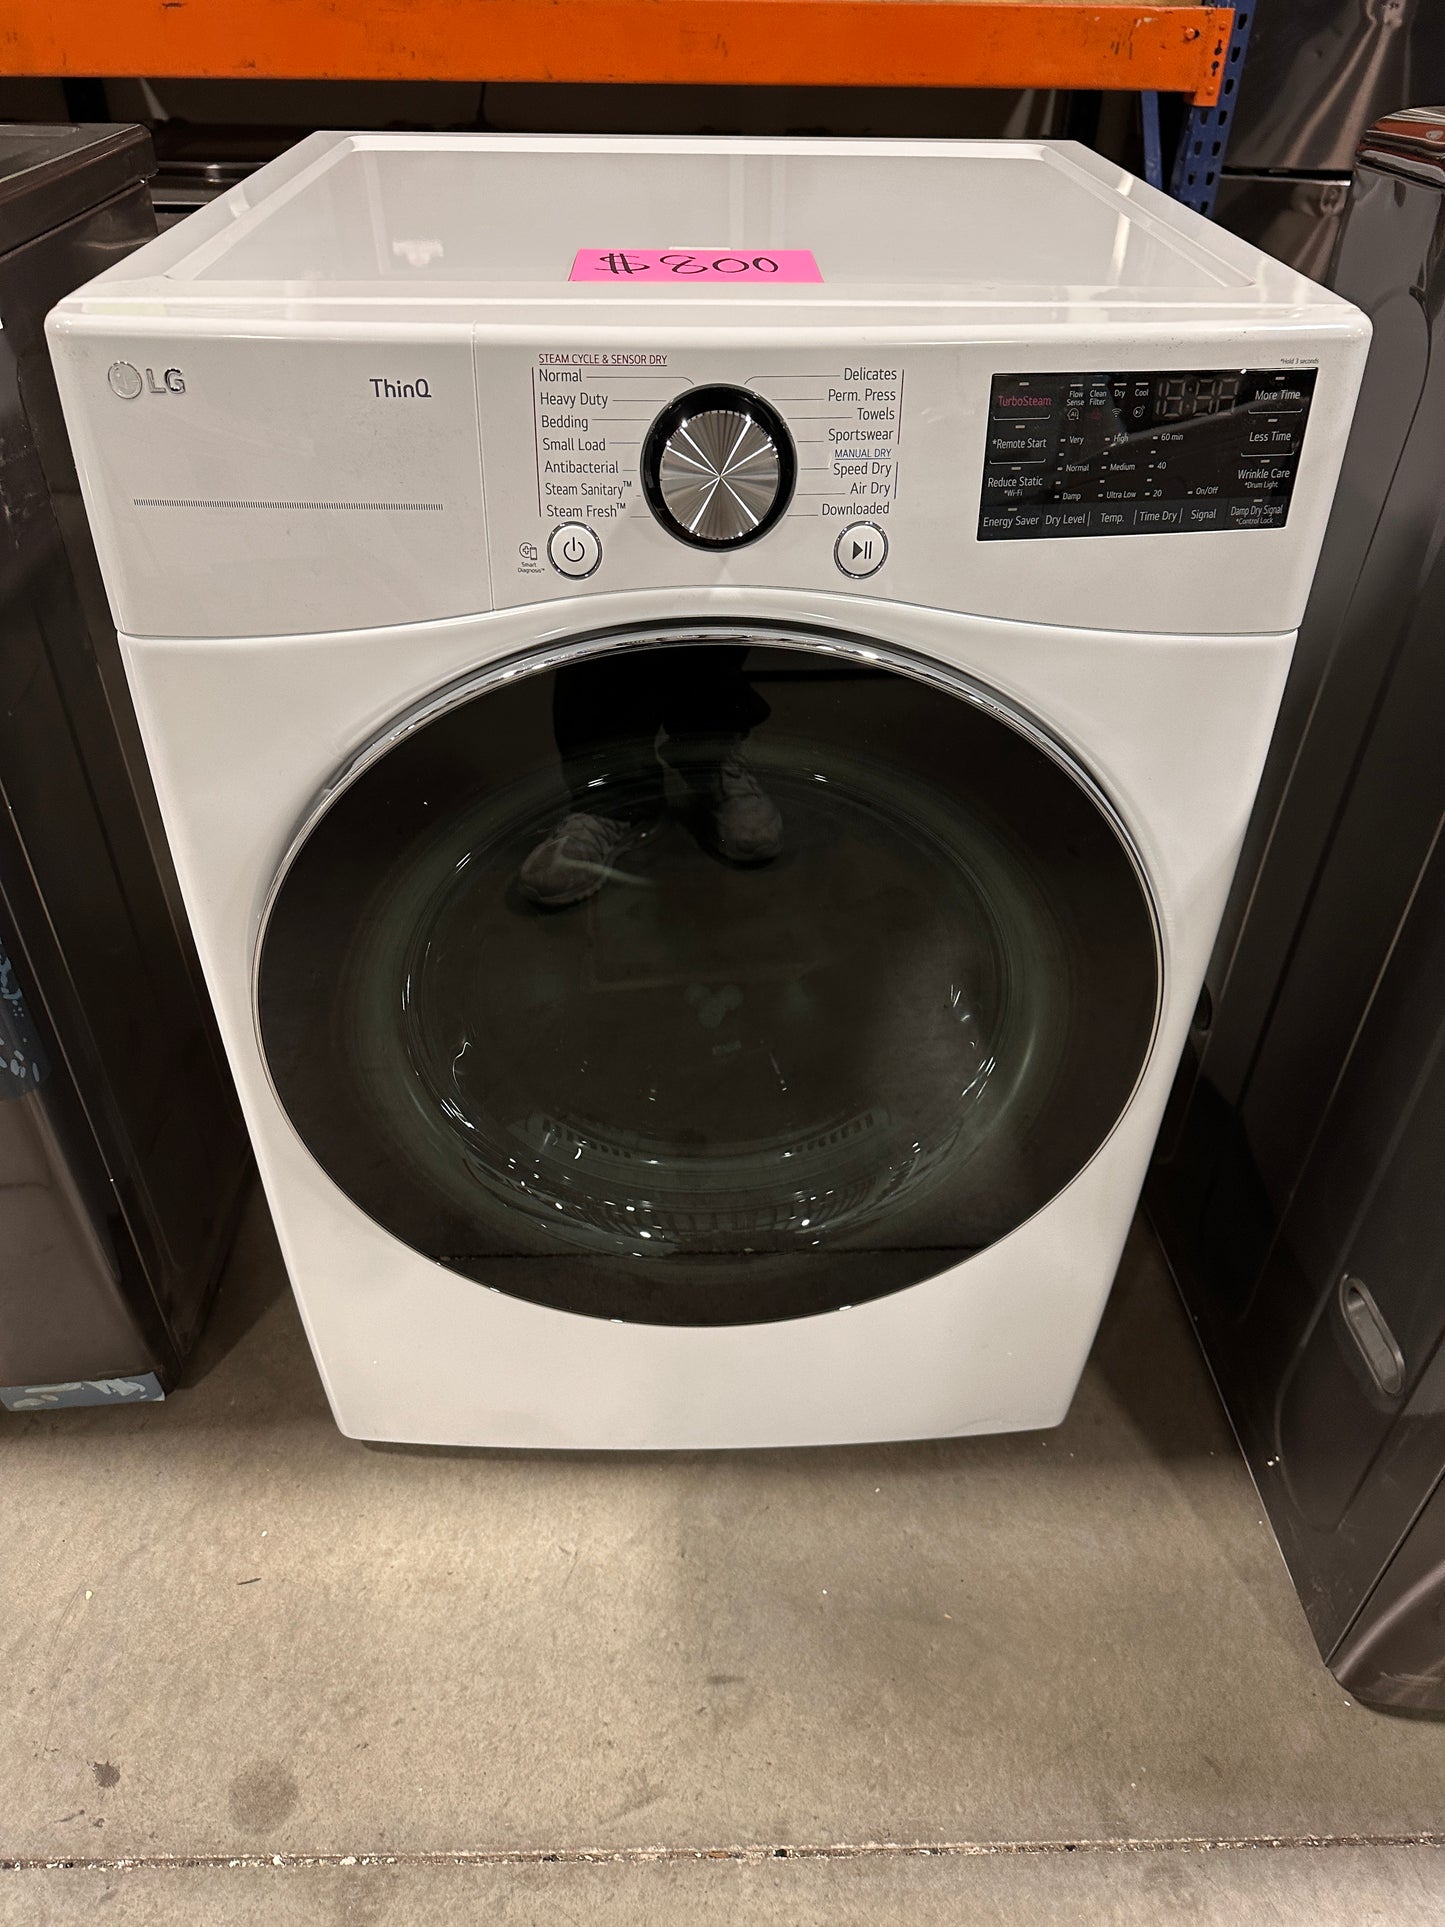 MODEL DLEX4200W STACKABLE SMART ELECTRIC DRYER - DRY12160